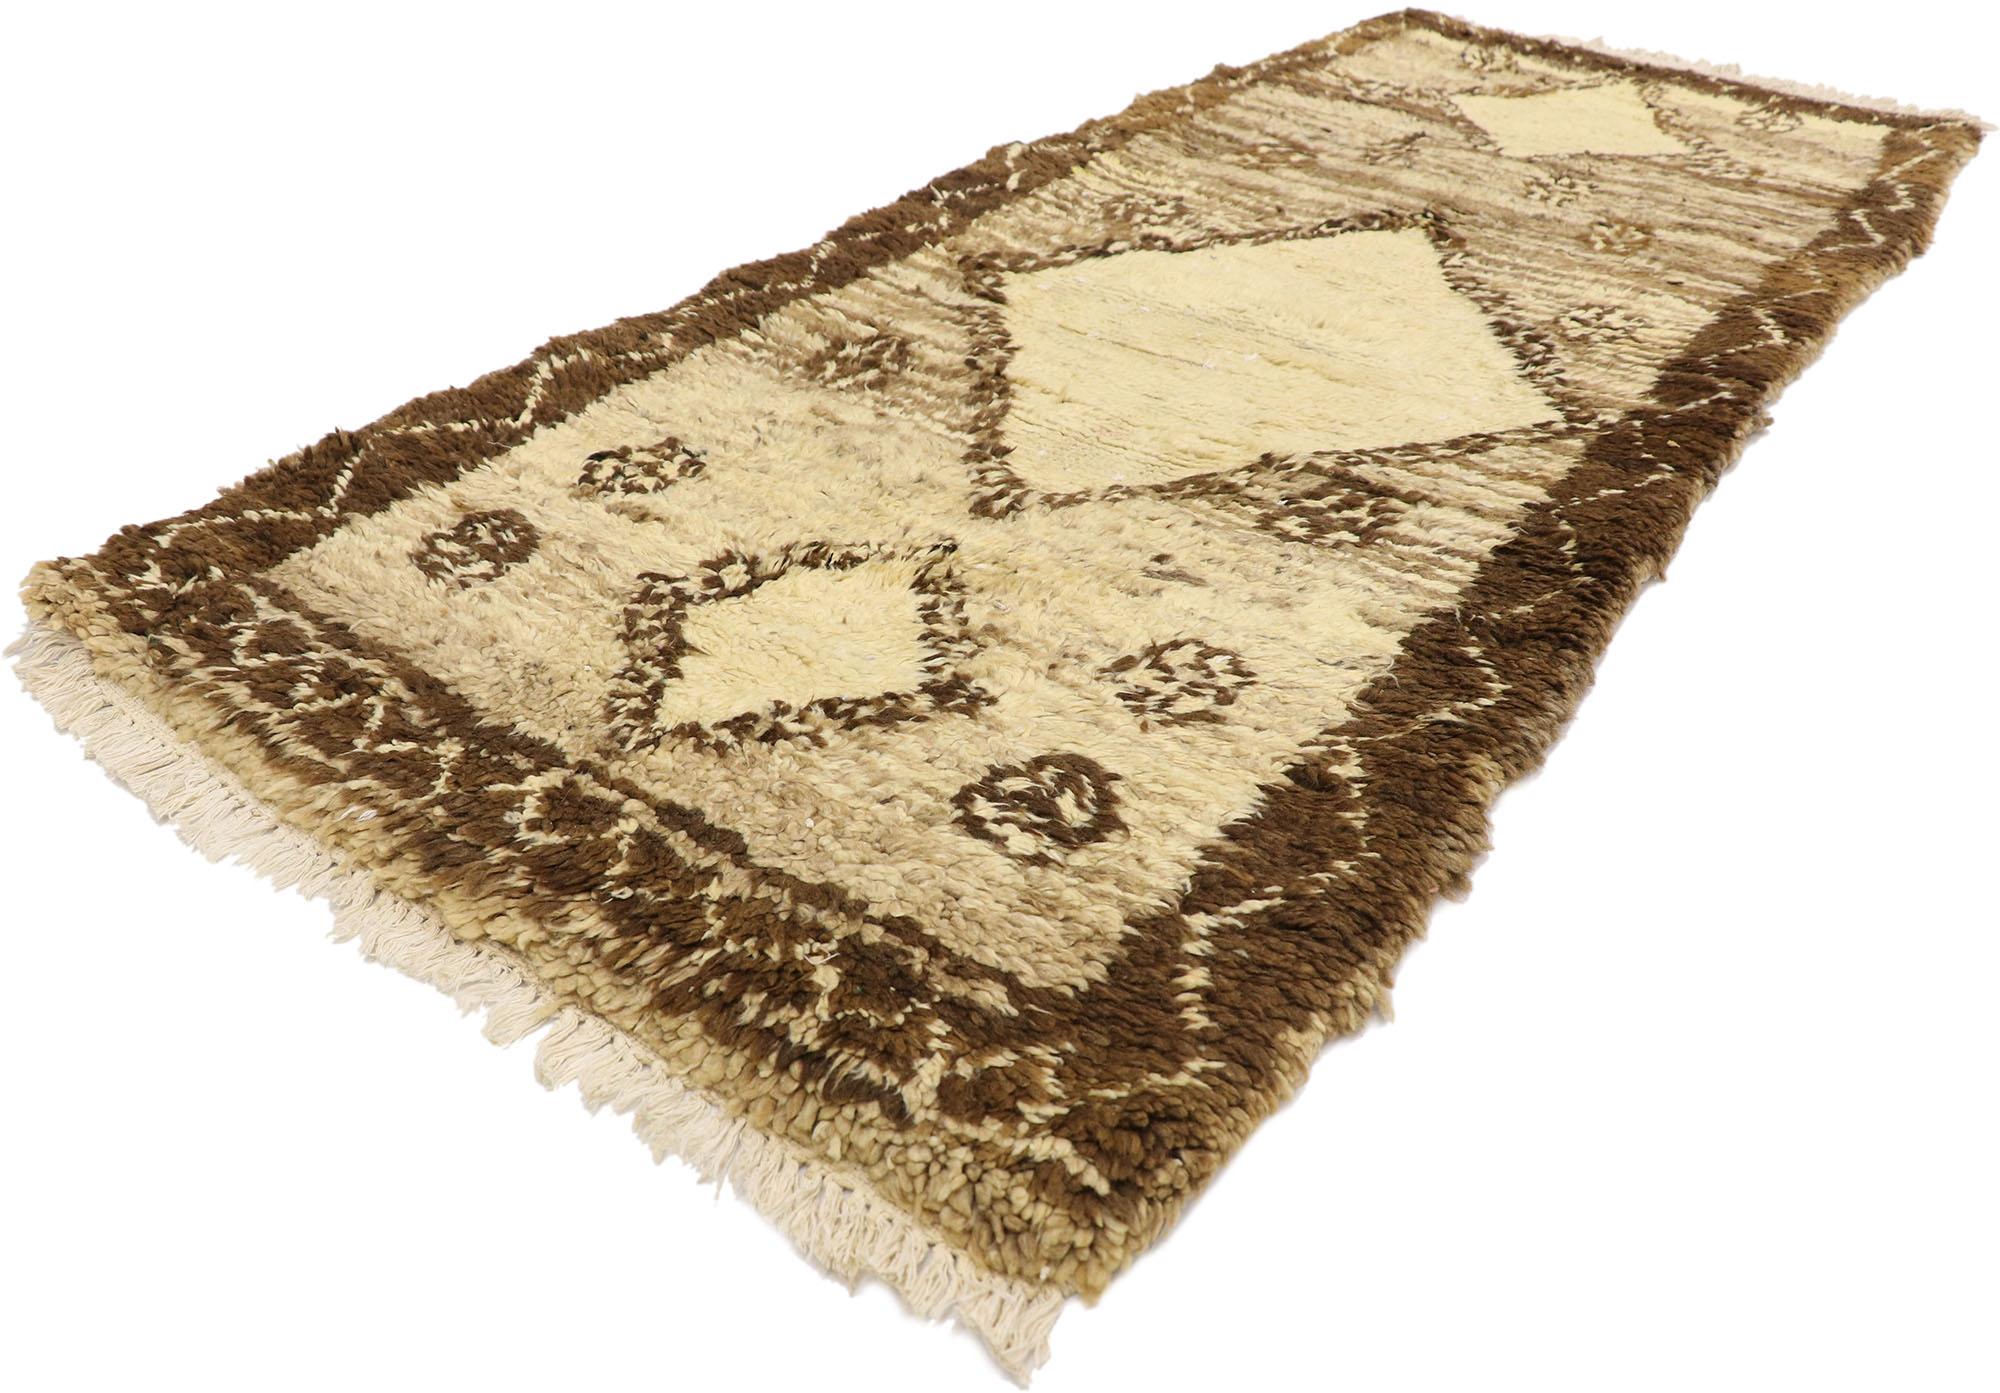 21566 Vintage Berber Moroccan Rug, 02'06 x 06'02.
Neutral bohemian meets cozy nomad in this hand knotted wool vintage Moroccan rug. The distinctive tribal elements and earthy neutral colors woven into this piece resulting in a rich, warm and